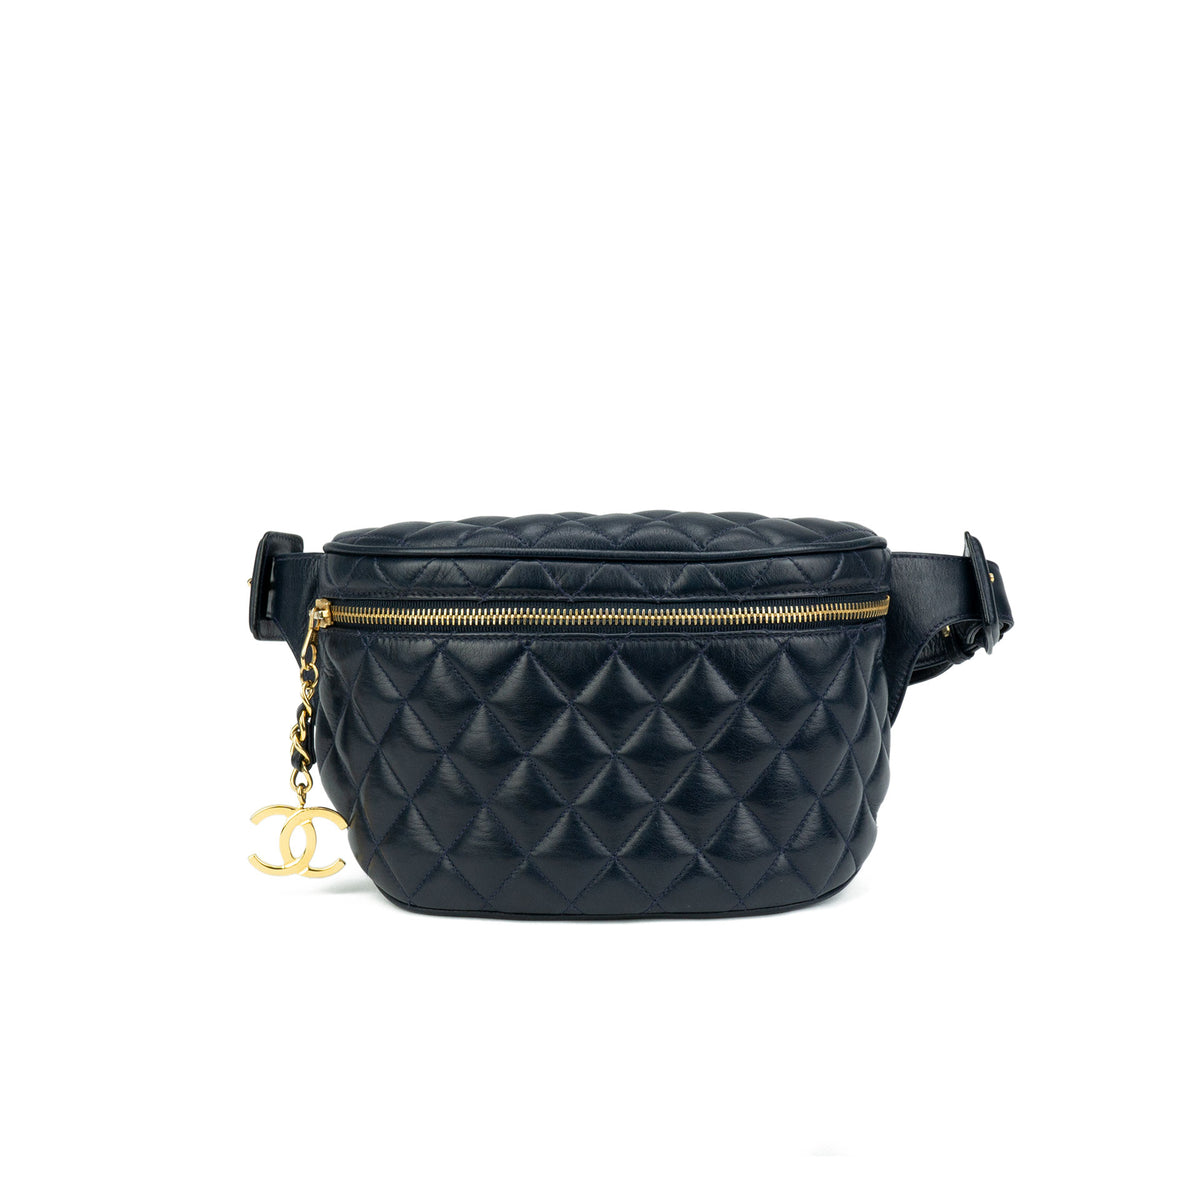 Chanel Navy Quilted Lambskin Vintage Fanny Pack